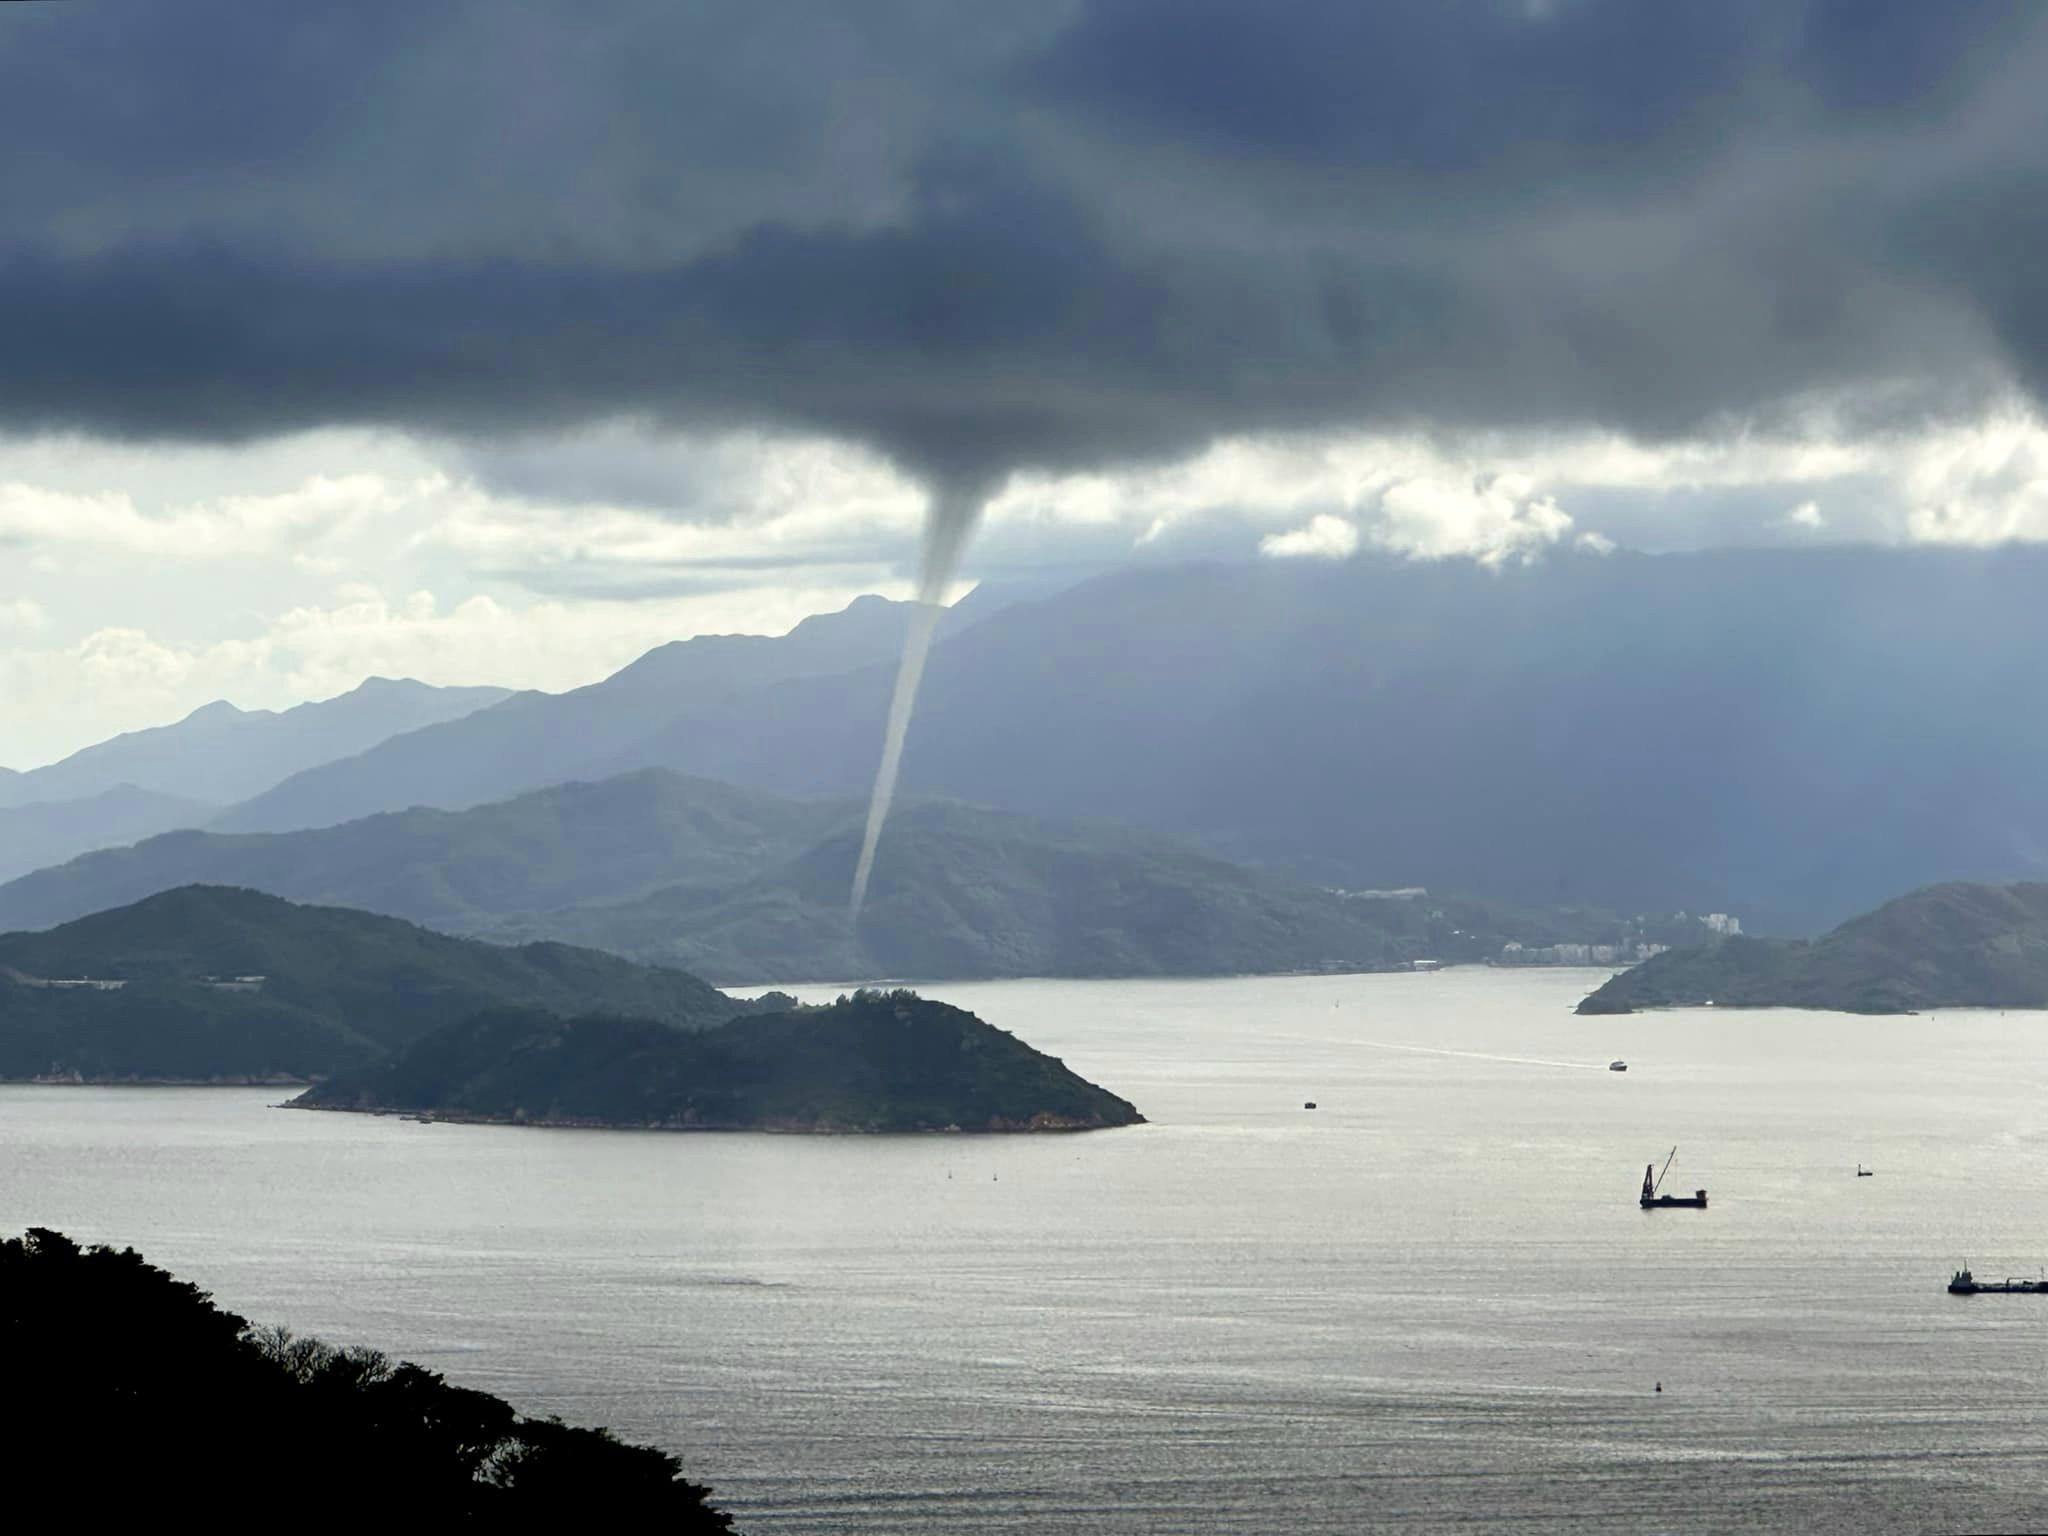 A waterspout over the sea near Hong Kong was reported on Friday afternoon. Photo: Facebook